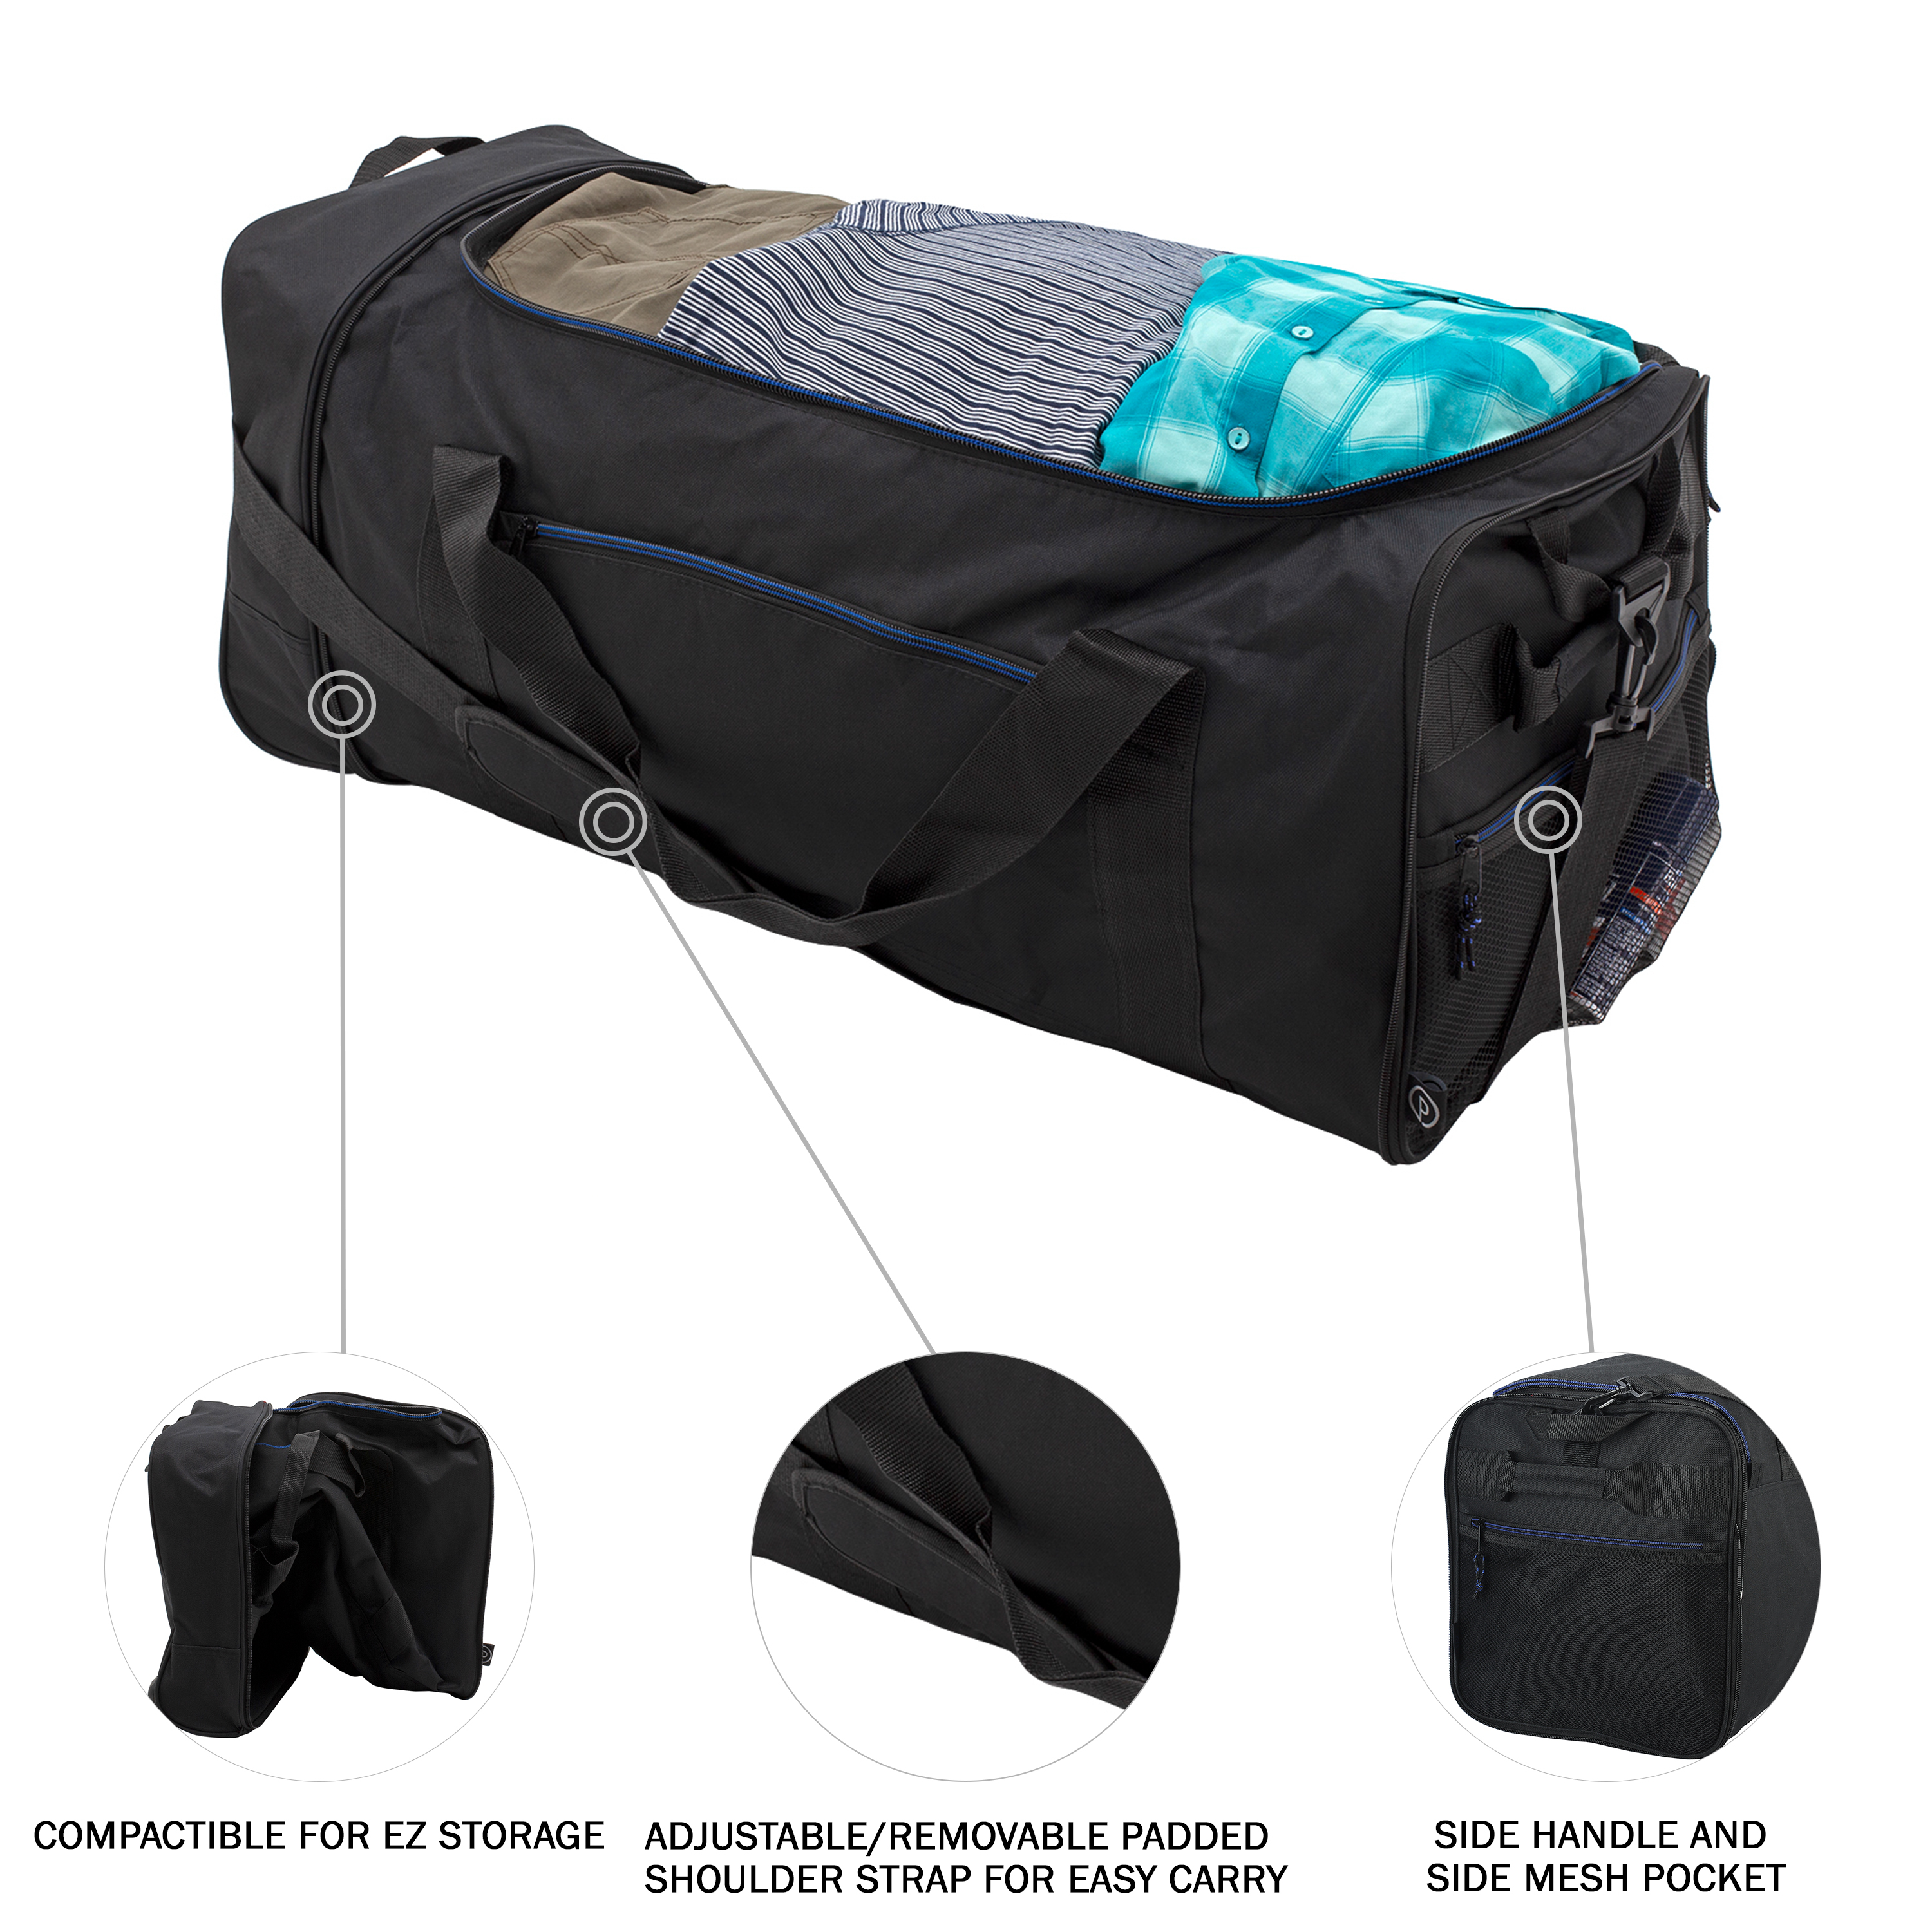 Protege 32" Wheeled and Compactible Polyester Rolling Duffel Bag, Black - image 3 of 8